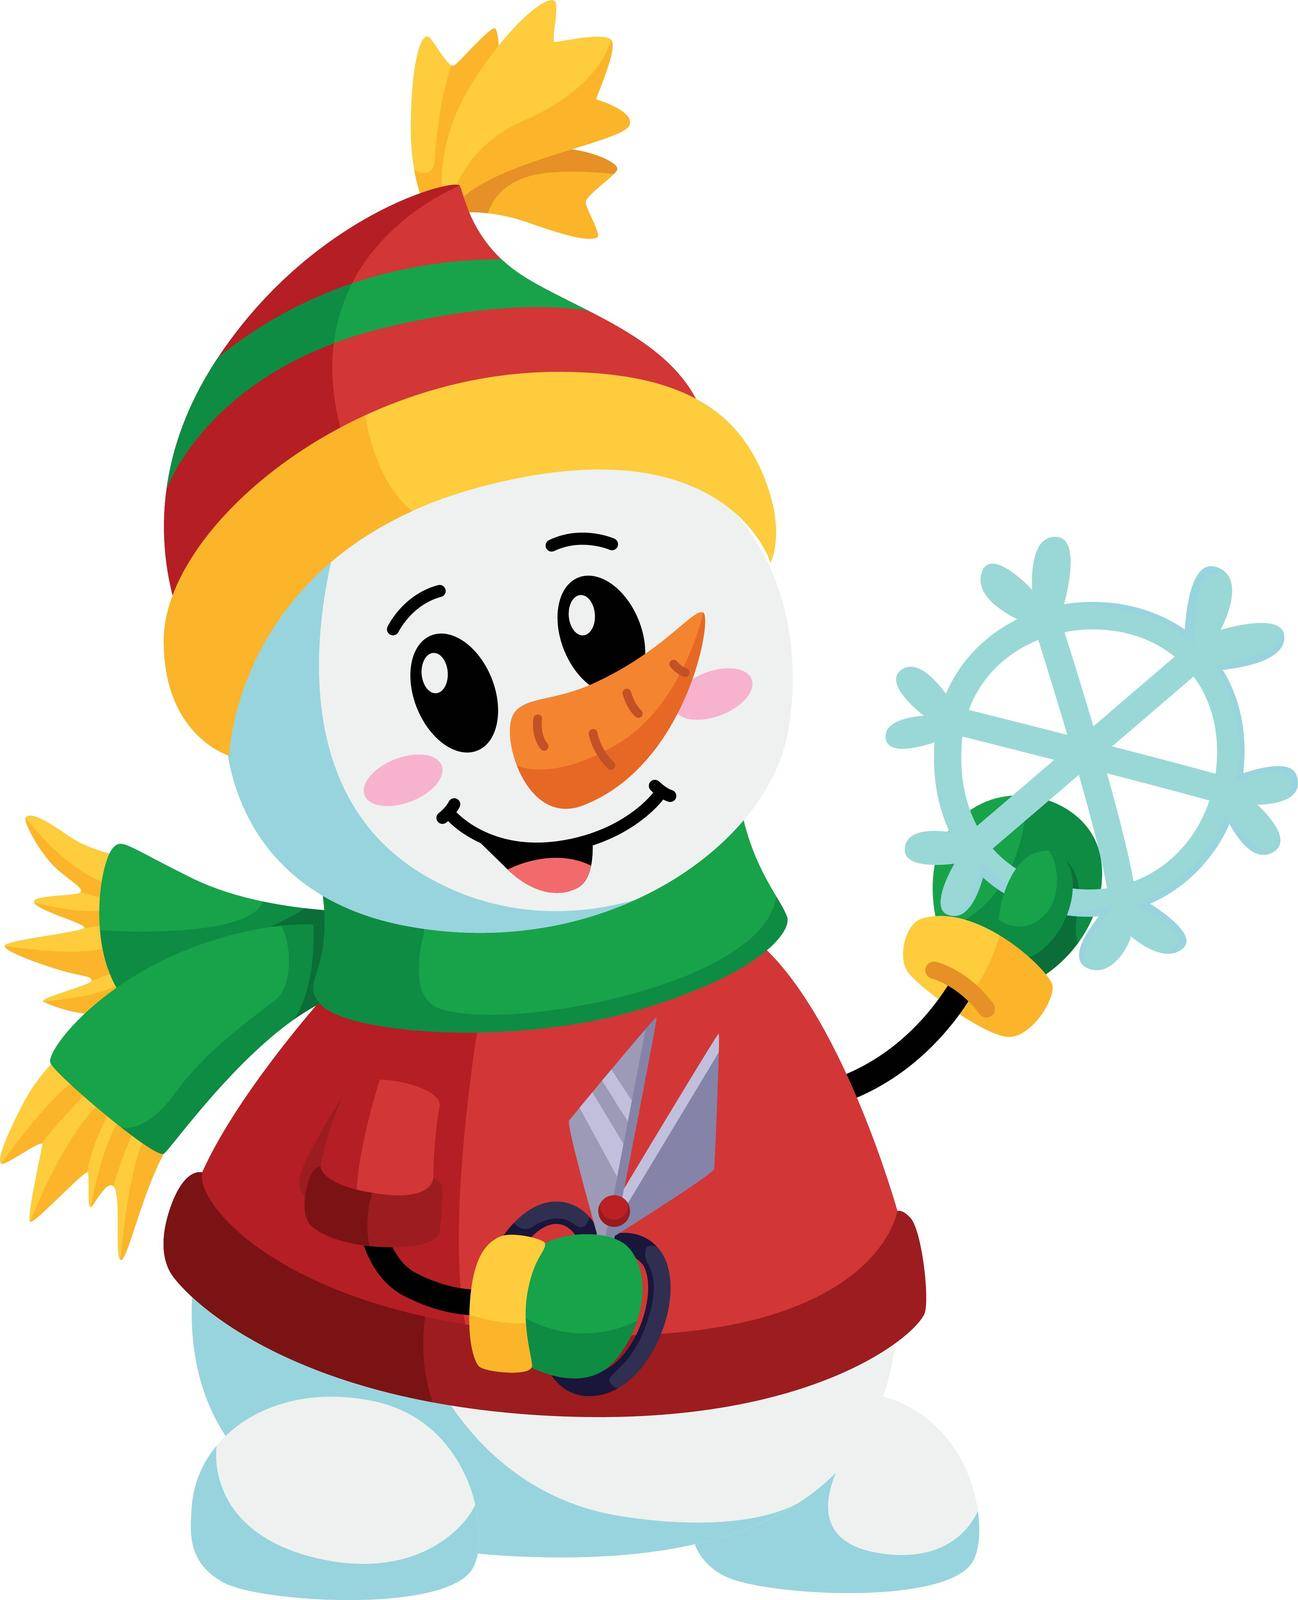 Snowman with snowflake. Winter character in warm clothes by LadadikArt